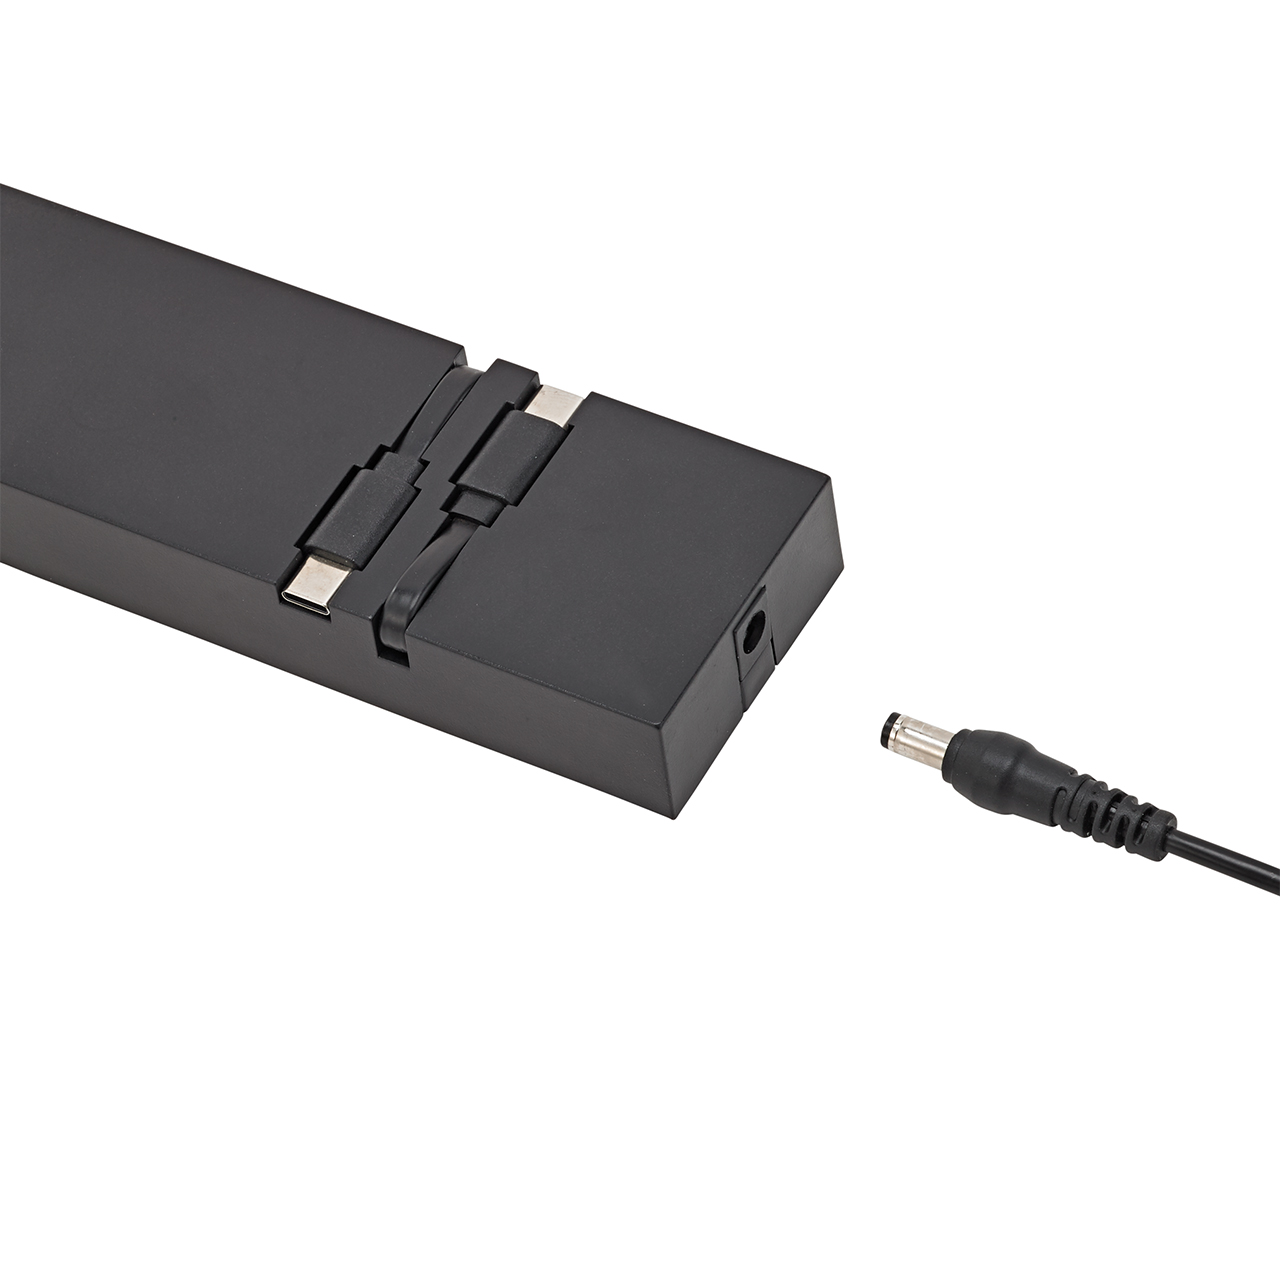 Nuindie USB-C 6-Fach Charger 320x50x20